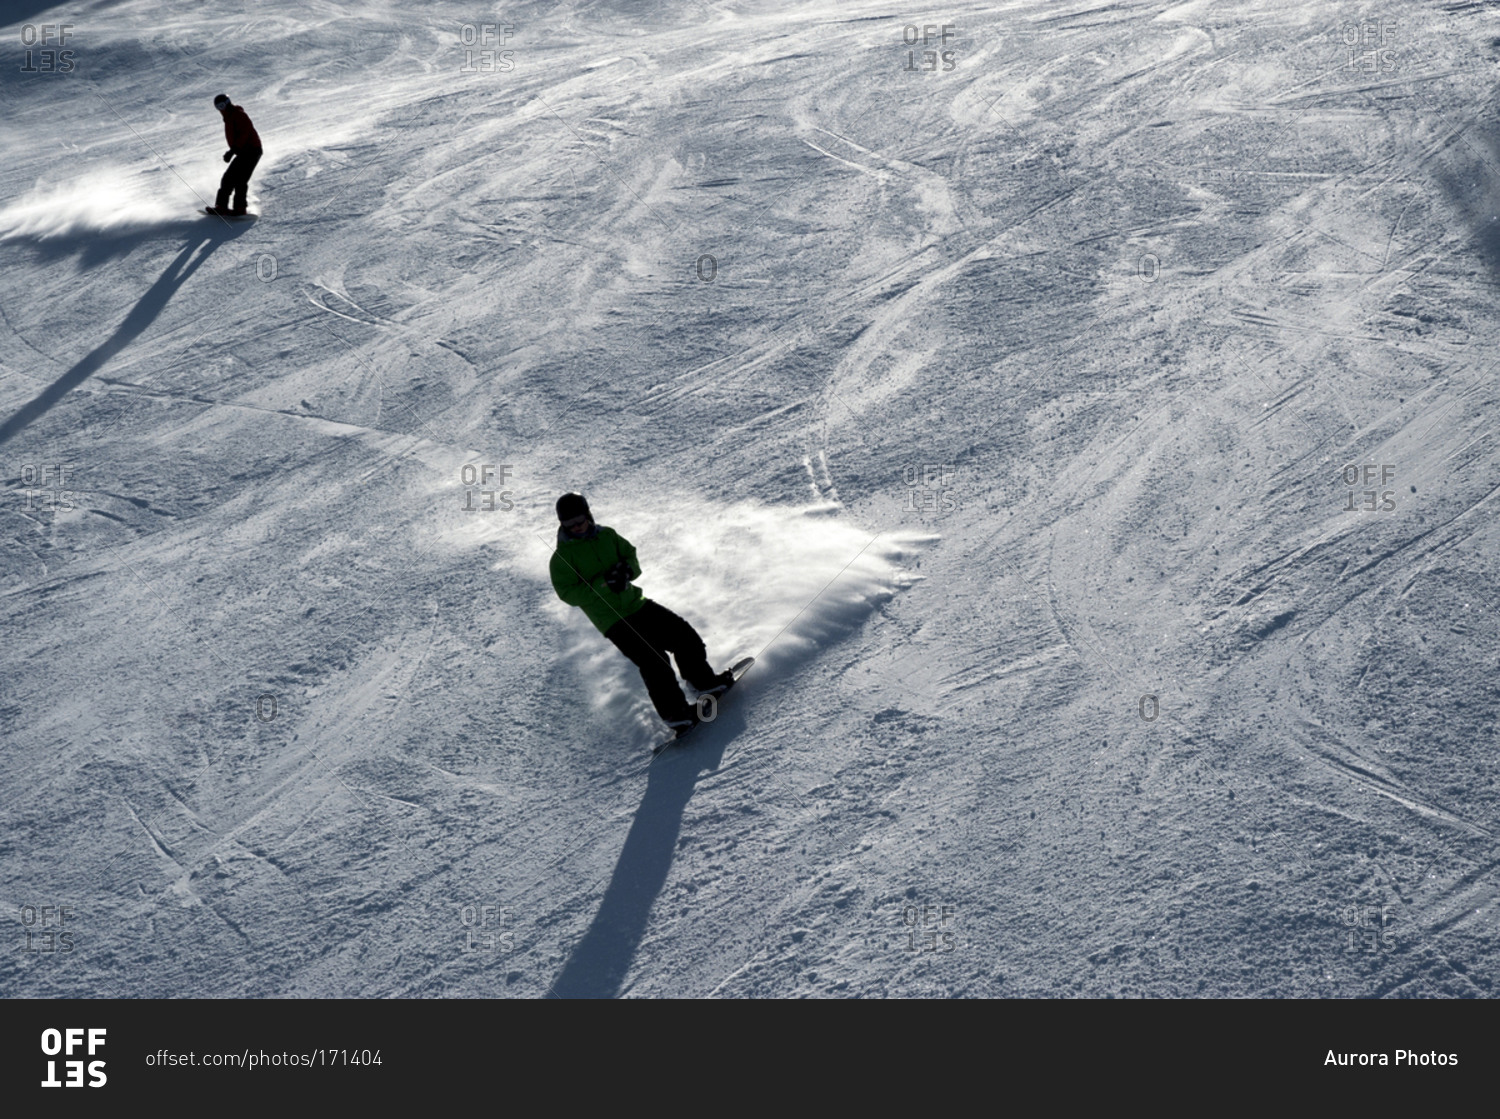 Two people snowboarding.